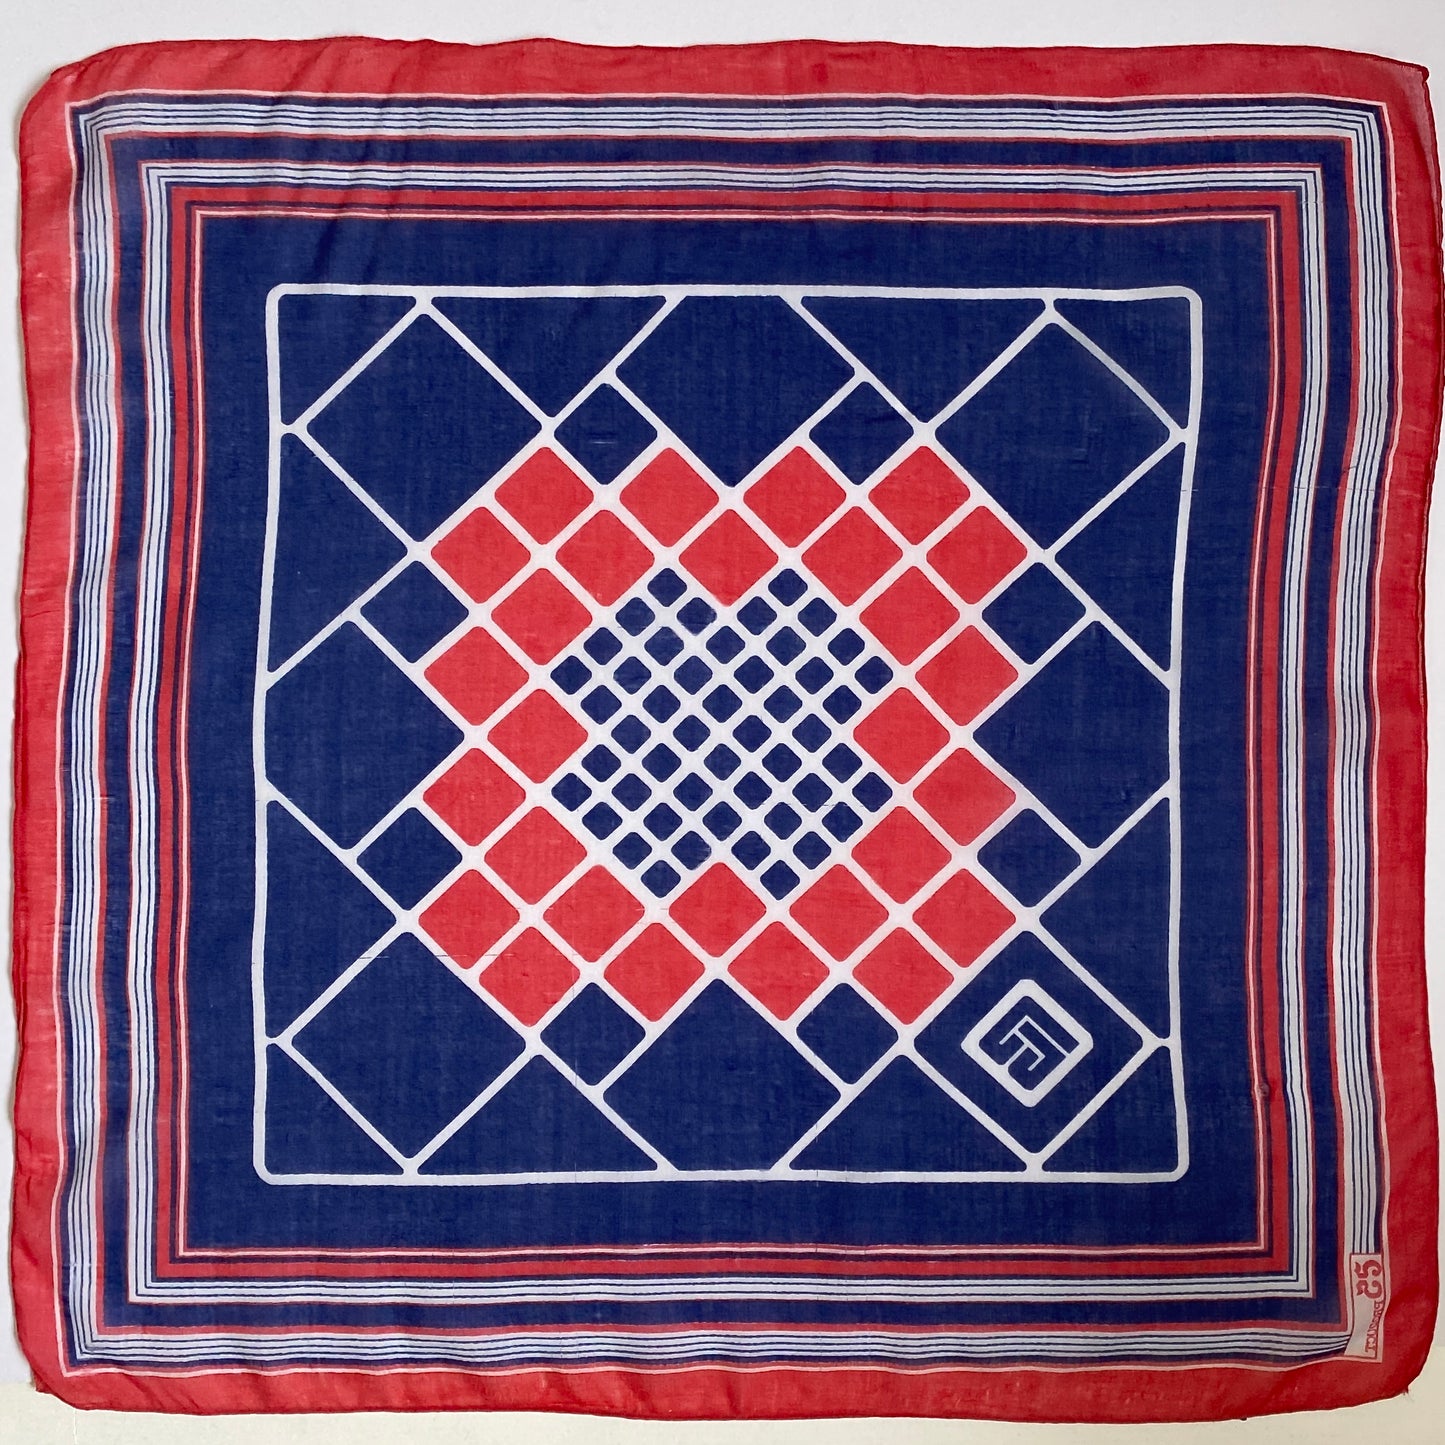 Red & Blue vintage scarf square Poly cotton feel fabric Slightly flawed Measures 21" x 21